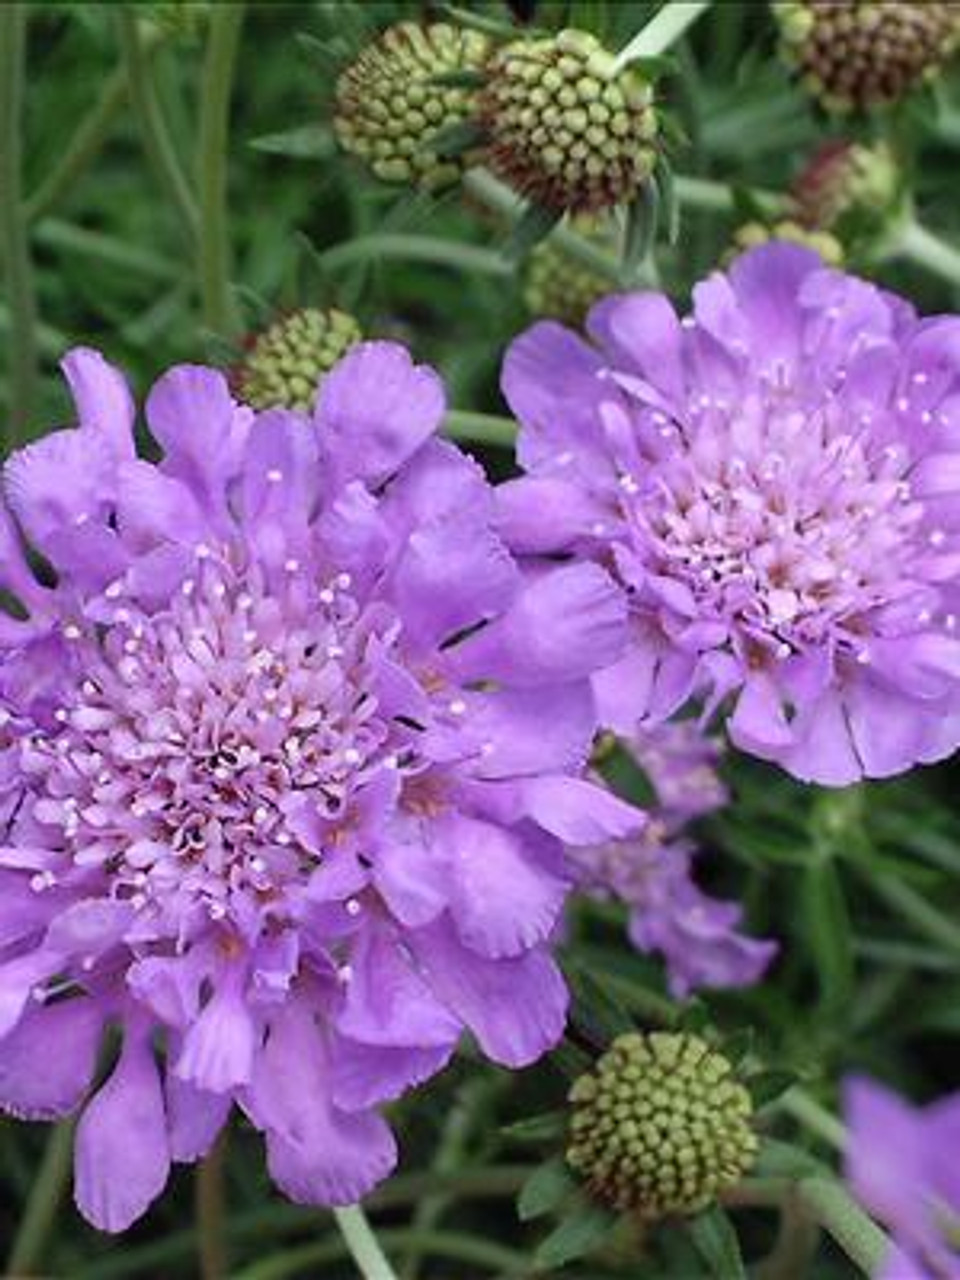 Scabiosa columbaria Butterfly Blue 3.5 inch pot